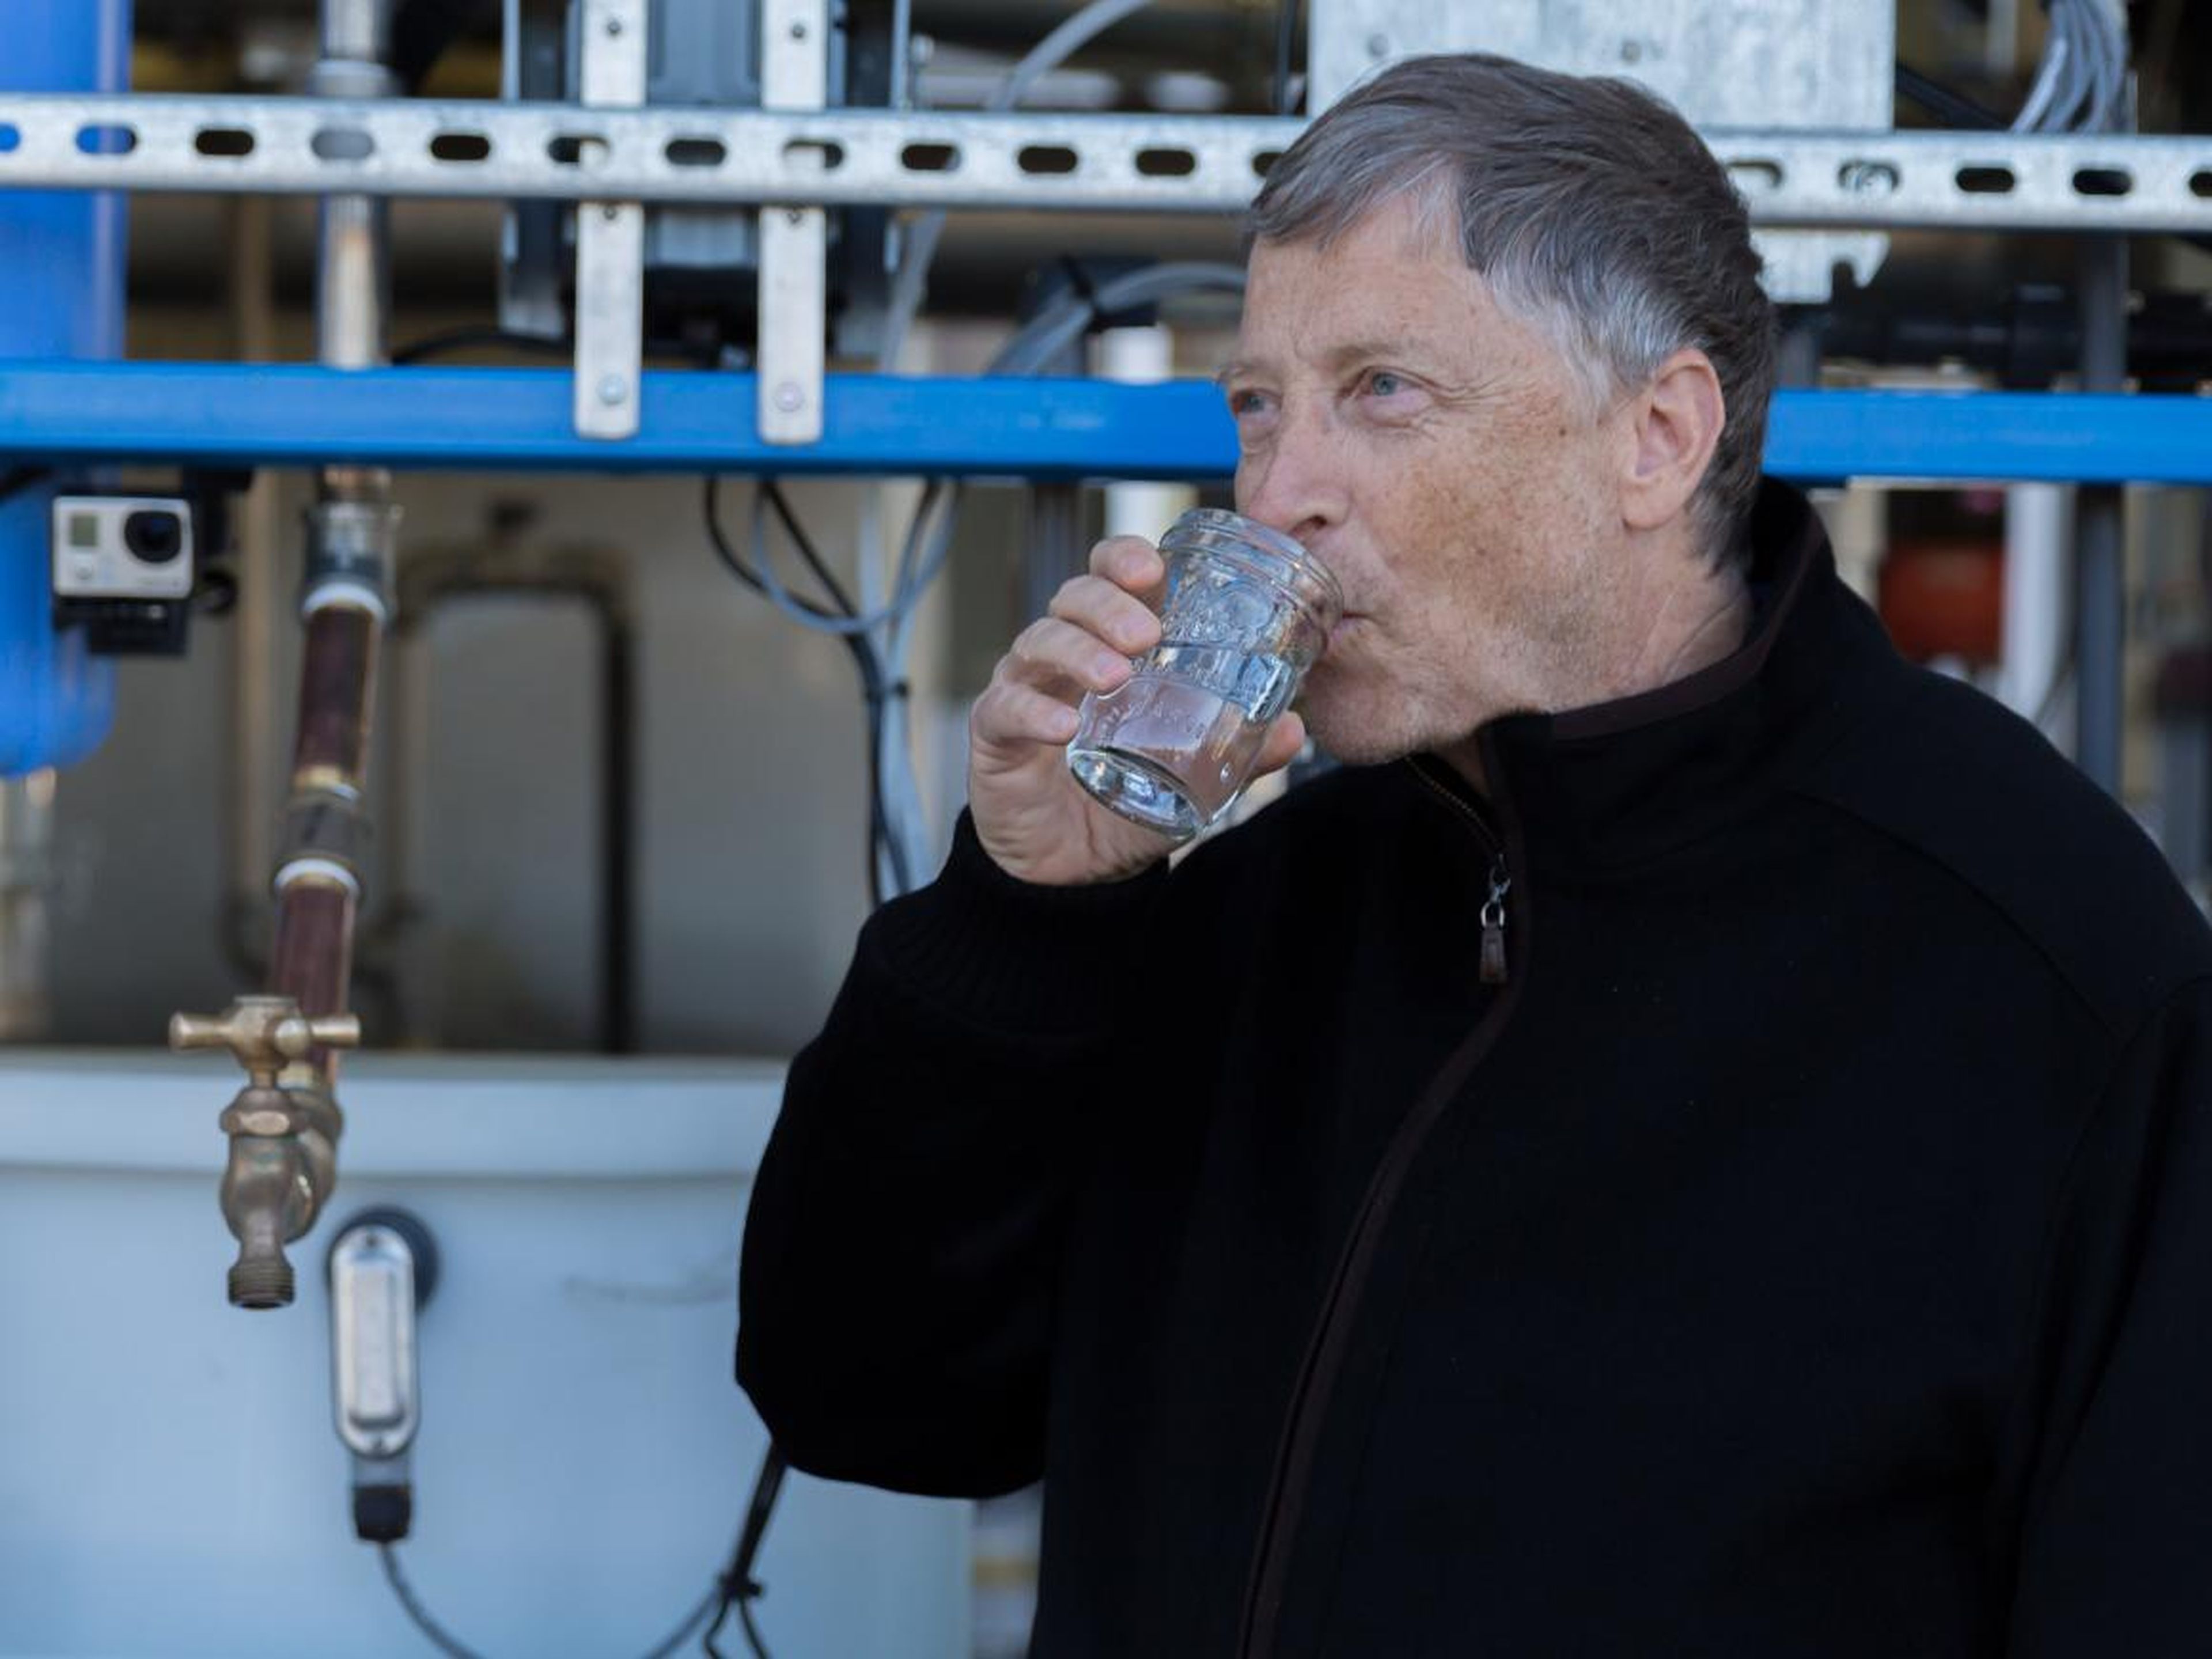 Bill Gates drinking human waste water that's been purified — not Diet Coke.